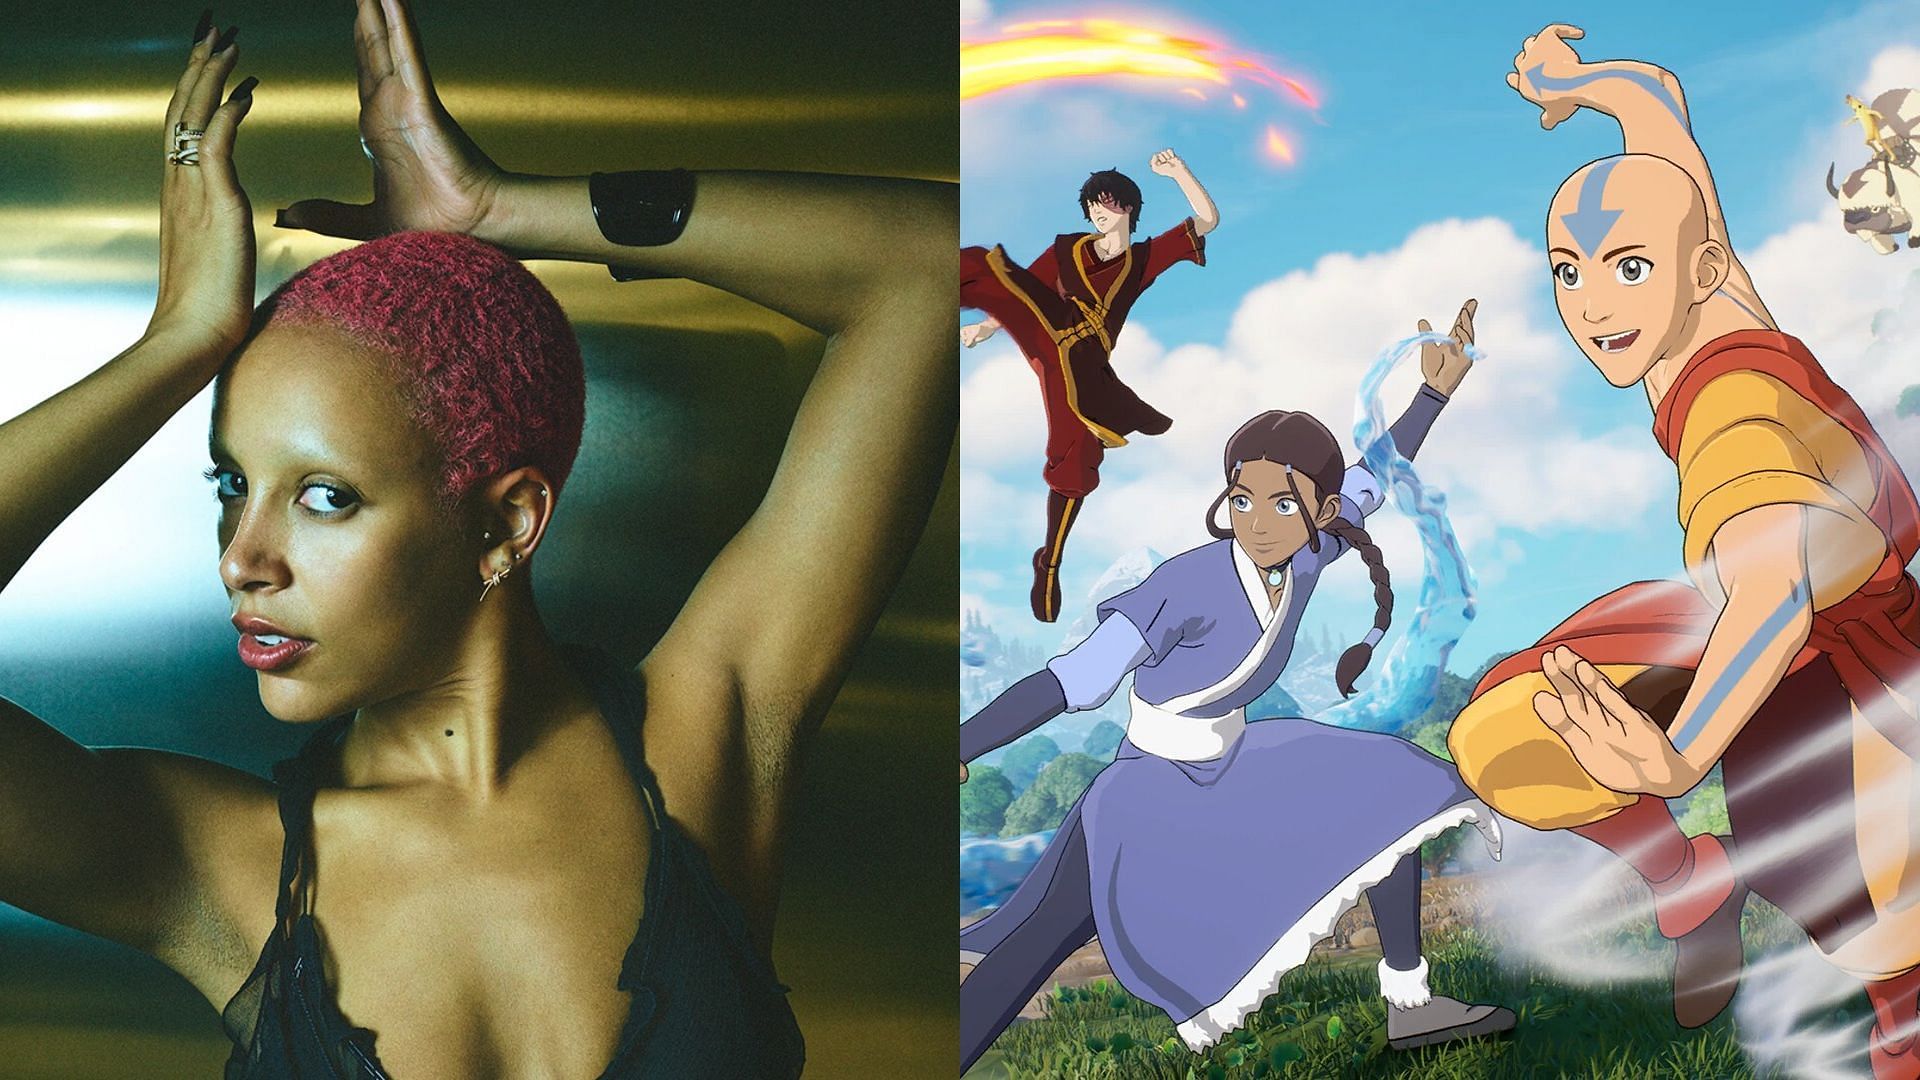 &ldquo;Water bending is a f**king crutch&rdquo;: Fortnite community reacts to Doja Cat&rsquo;s criticism of Avatar mythics in-game